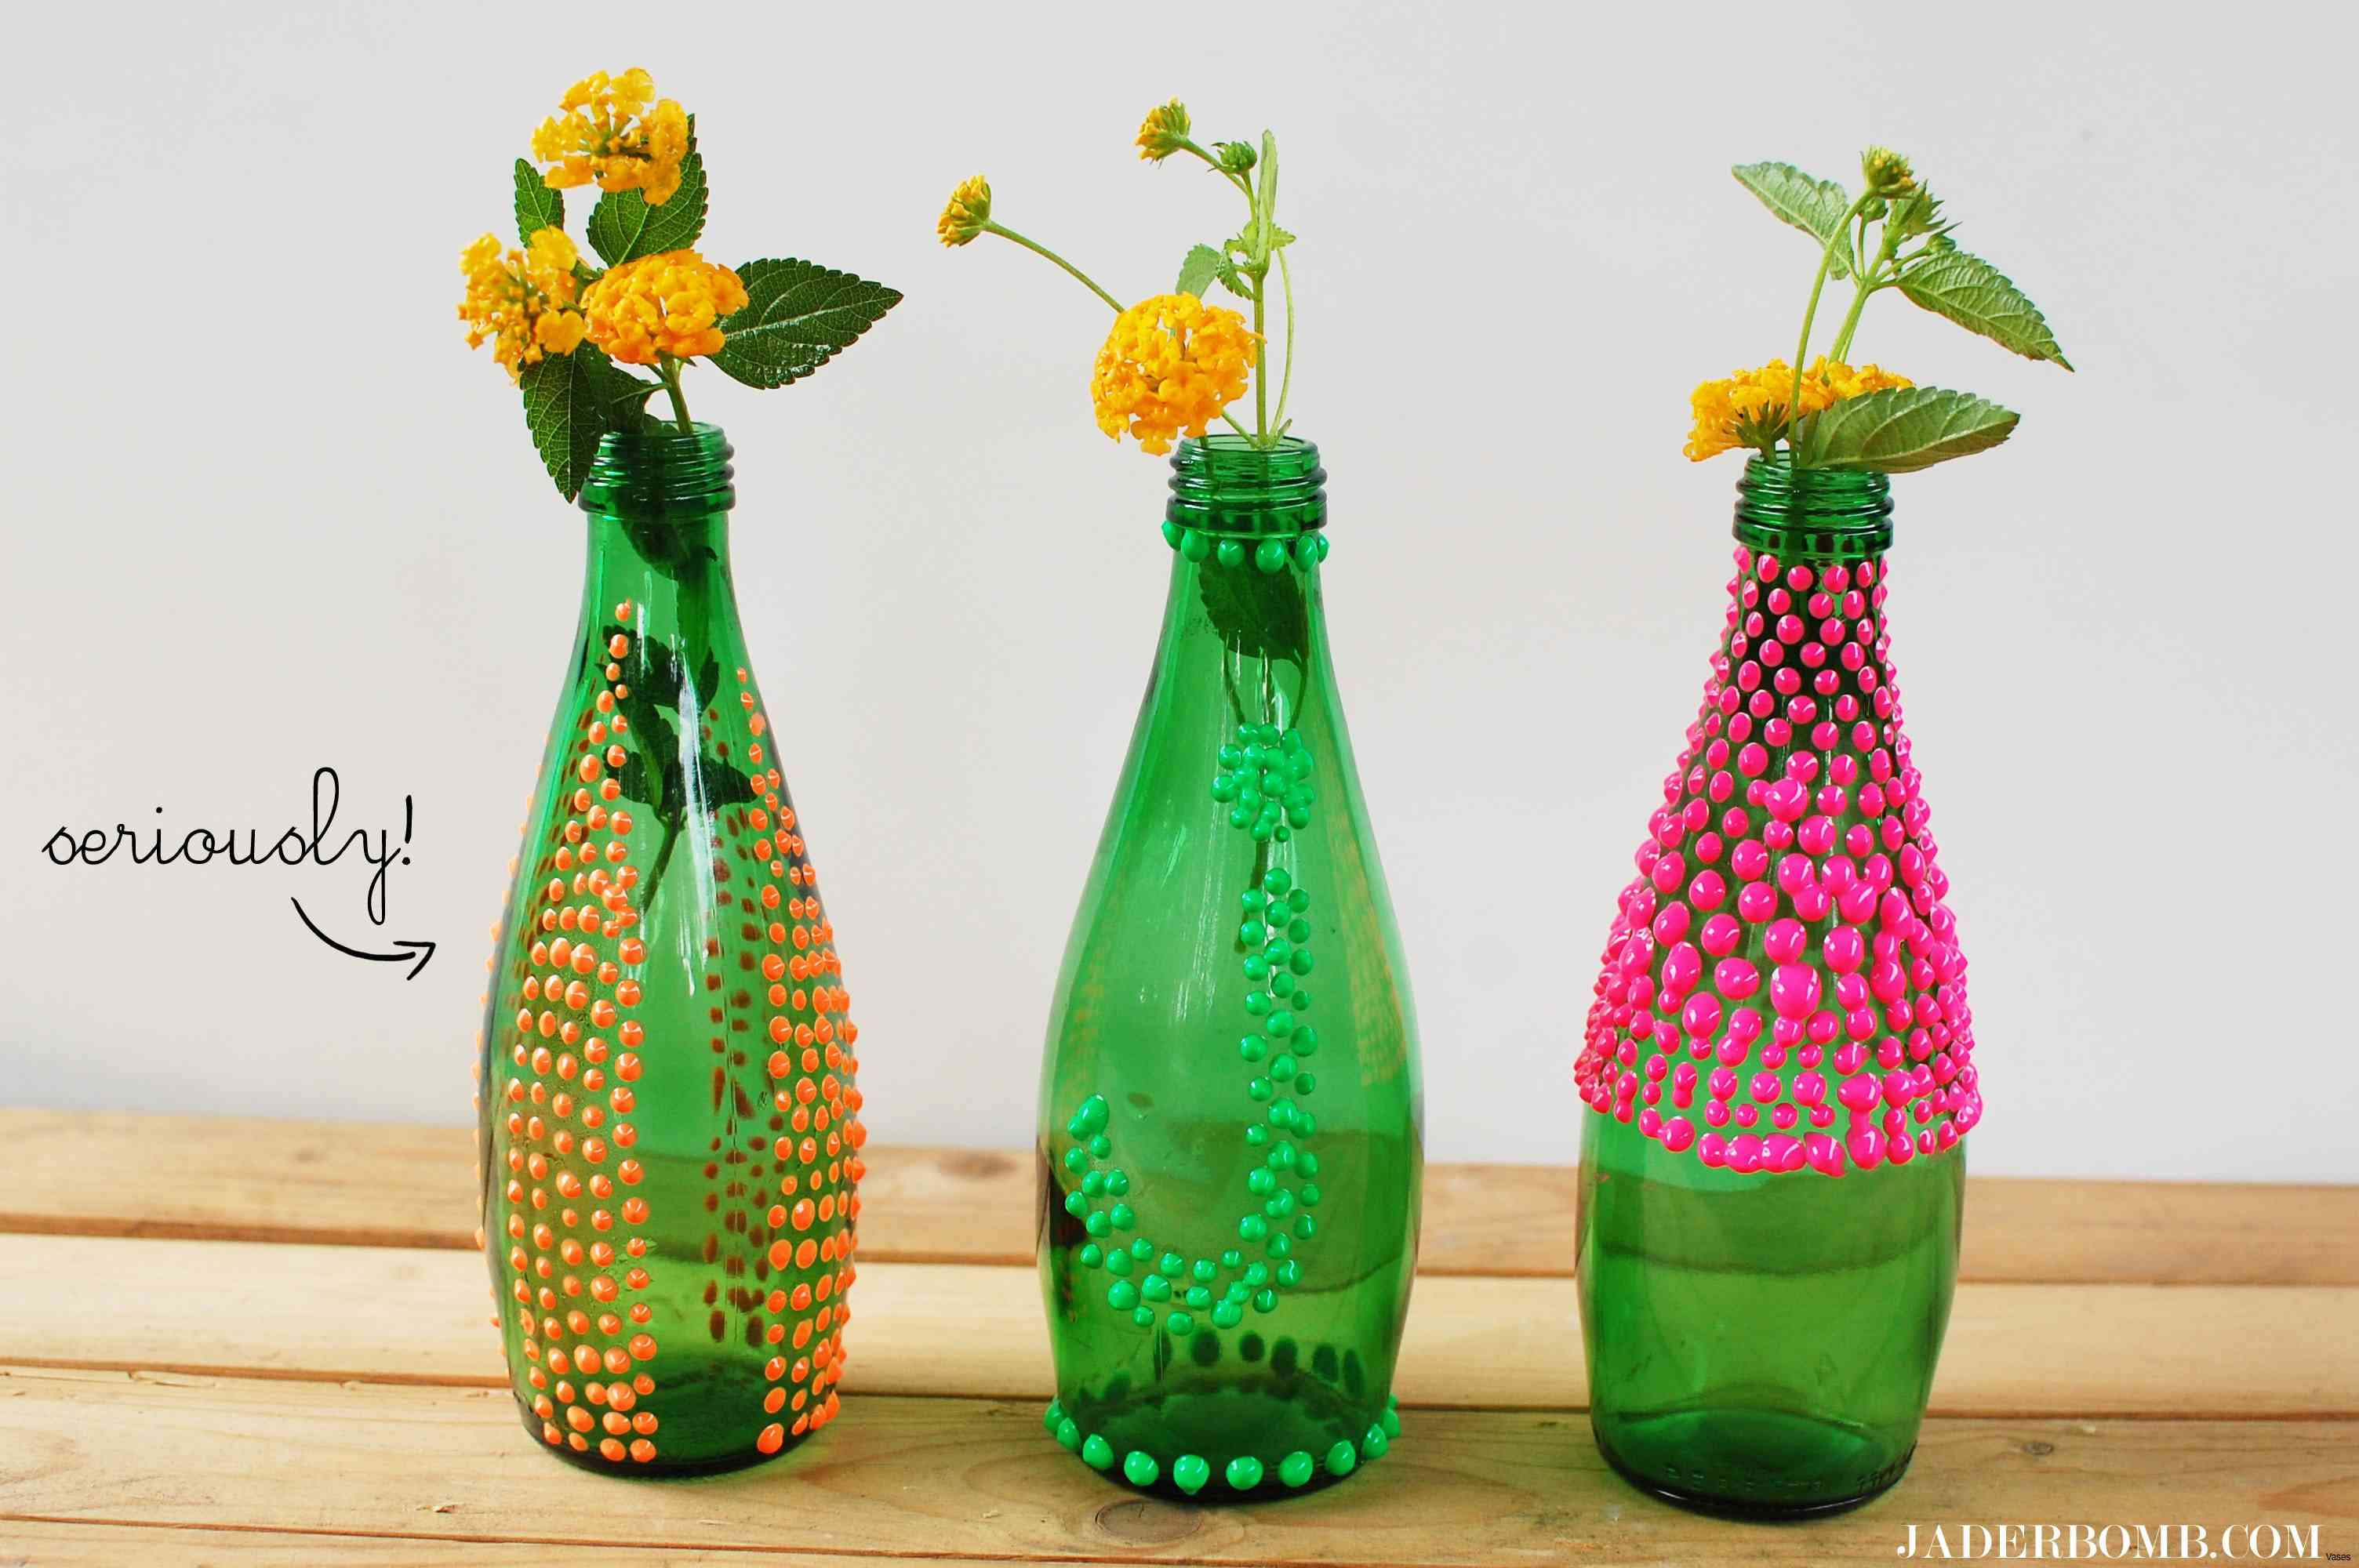 29 Nice Glass Vases Near Me 2024 free download glass vases near me of wide glass vase image paint a picture luxury h vases paint vase i 0d with regard to wide glass vase image paint a picture luxury h vases paint vase i 0d with glue